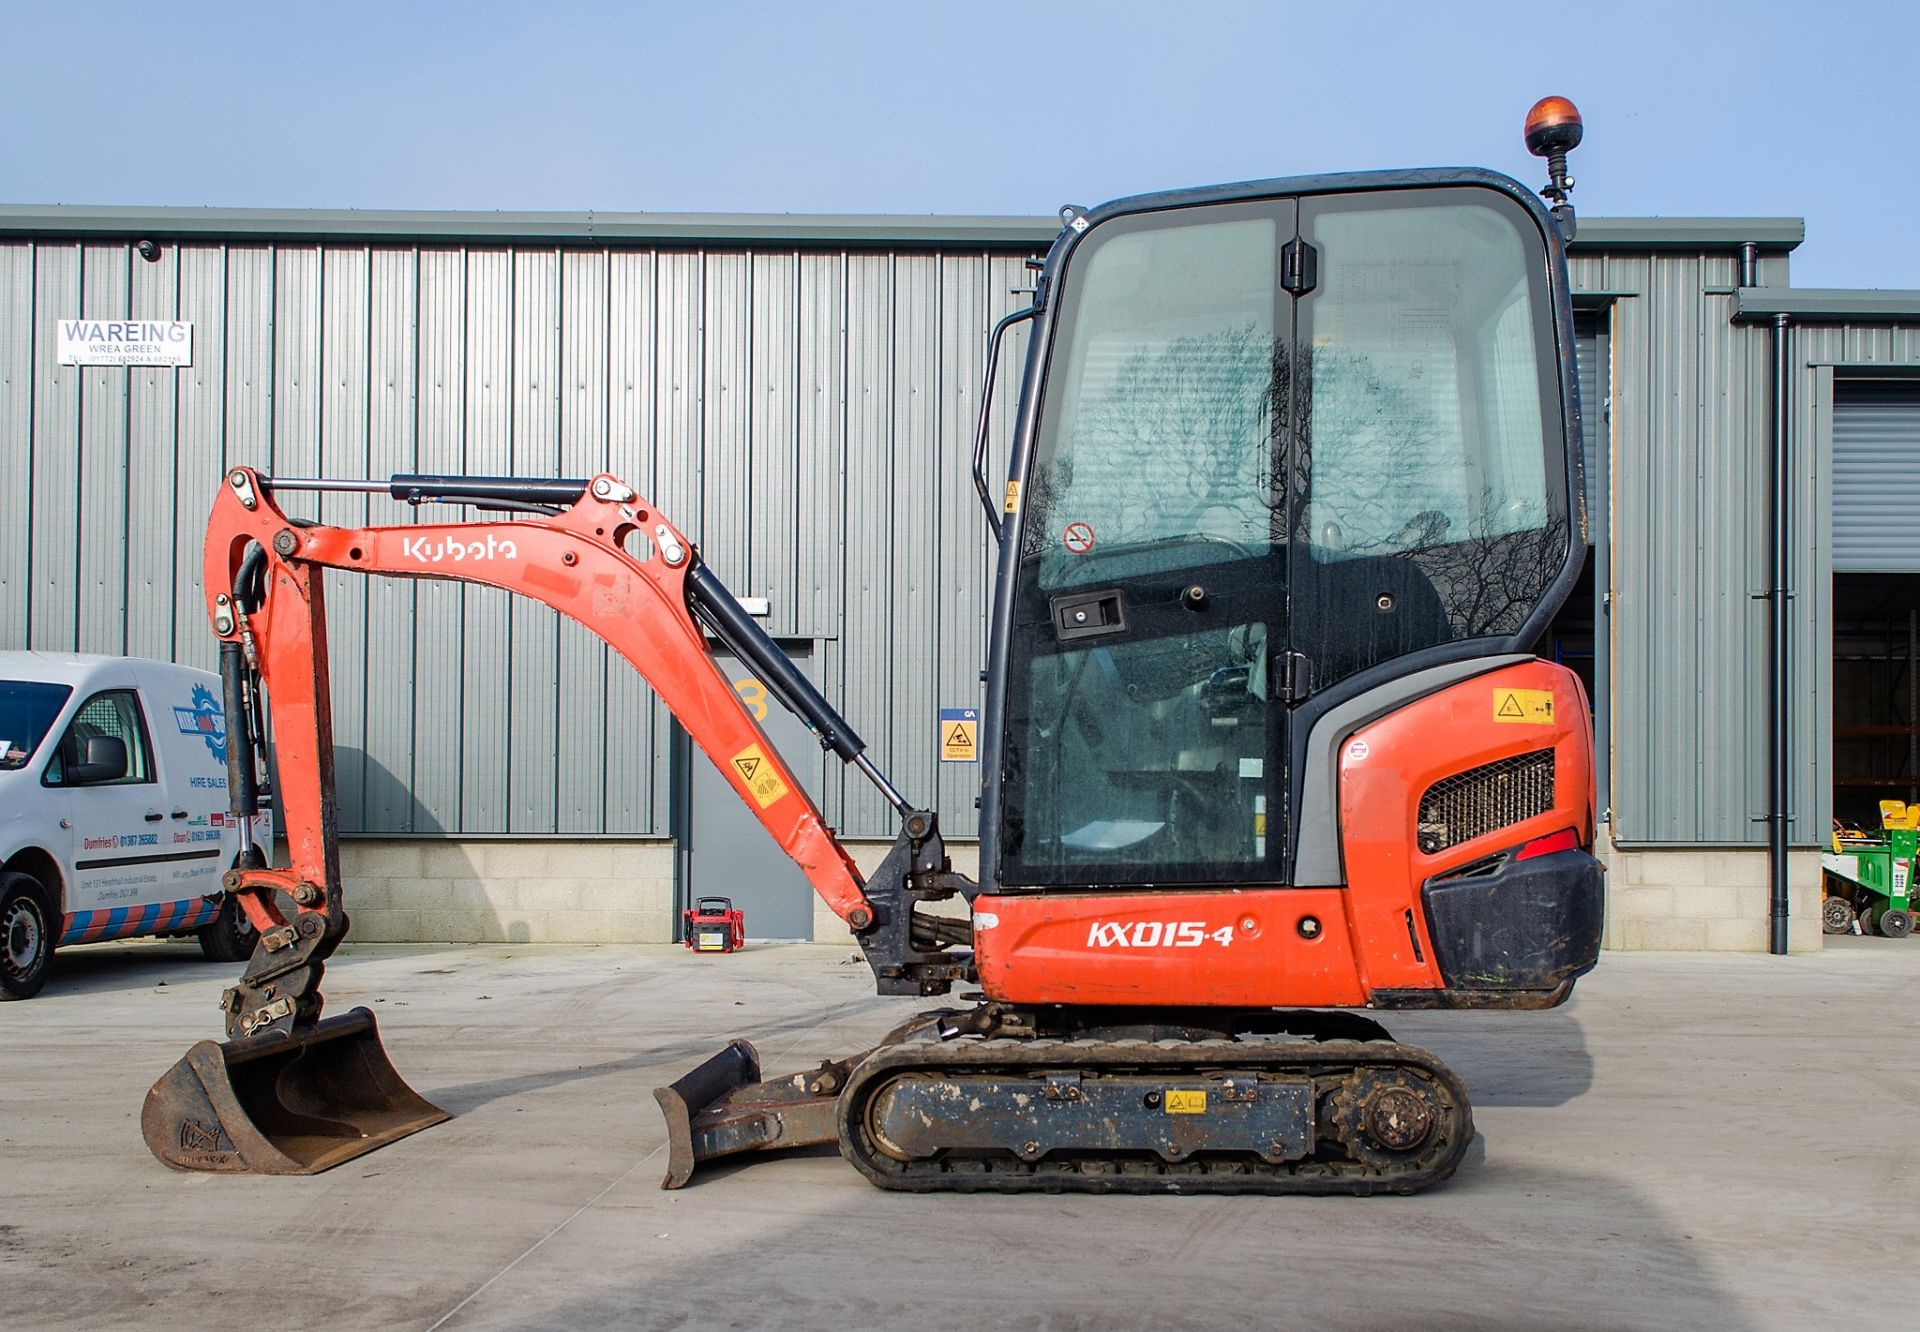 Kubota KX015-4 1.5 tonne rubber tracked excavator Year: 2014 S/N: 58181 Recorded Hours: 1616 - Image 7 of 21